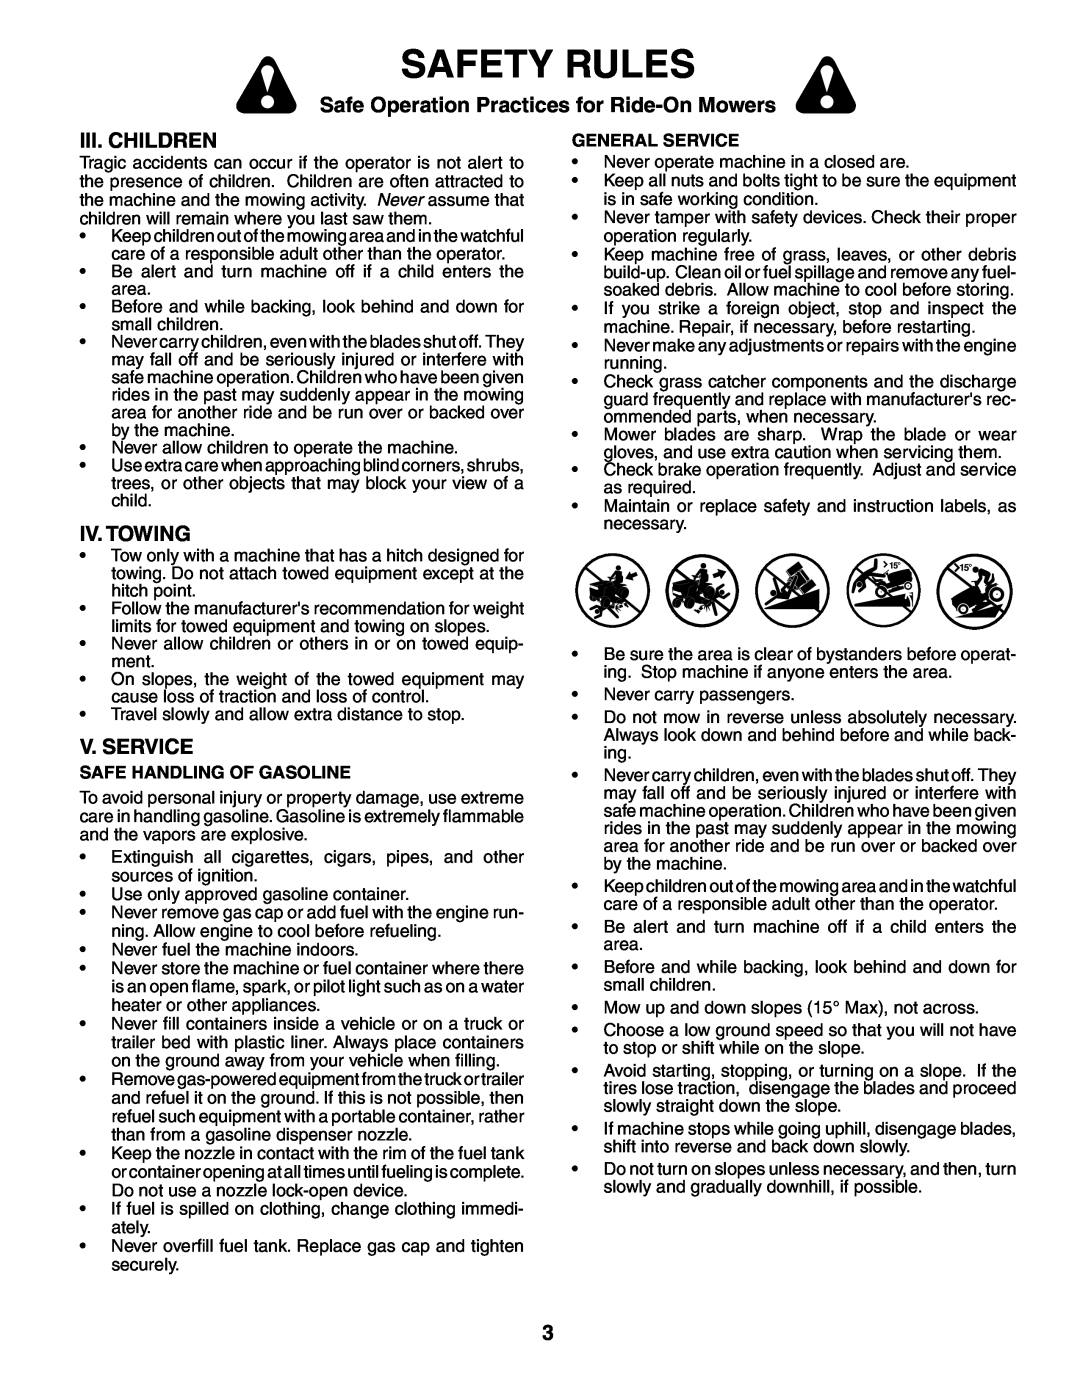 Poulan PB1638LT manual Iii. Children, Iv. Towing, V. Service, Safety Rules, Safe Operation Practices for Ride-OnMowers 